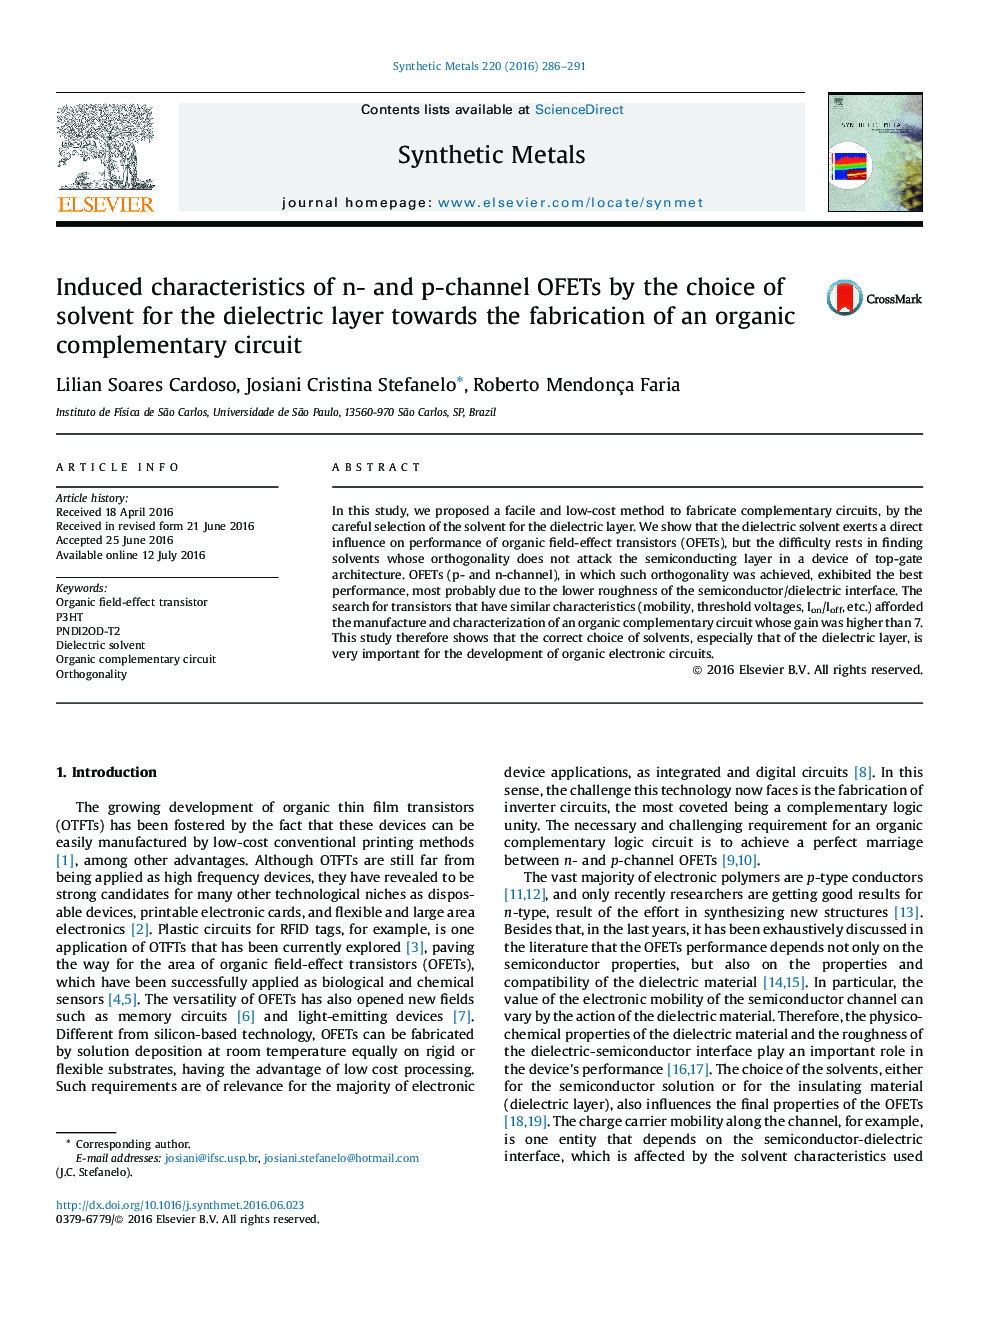 Induced characteristics of n- and p-channel OFETs by the choice of solvent for the dielectric layer towards the fabrication of an organic complementary circuit